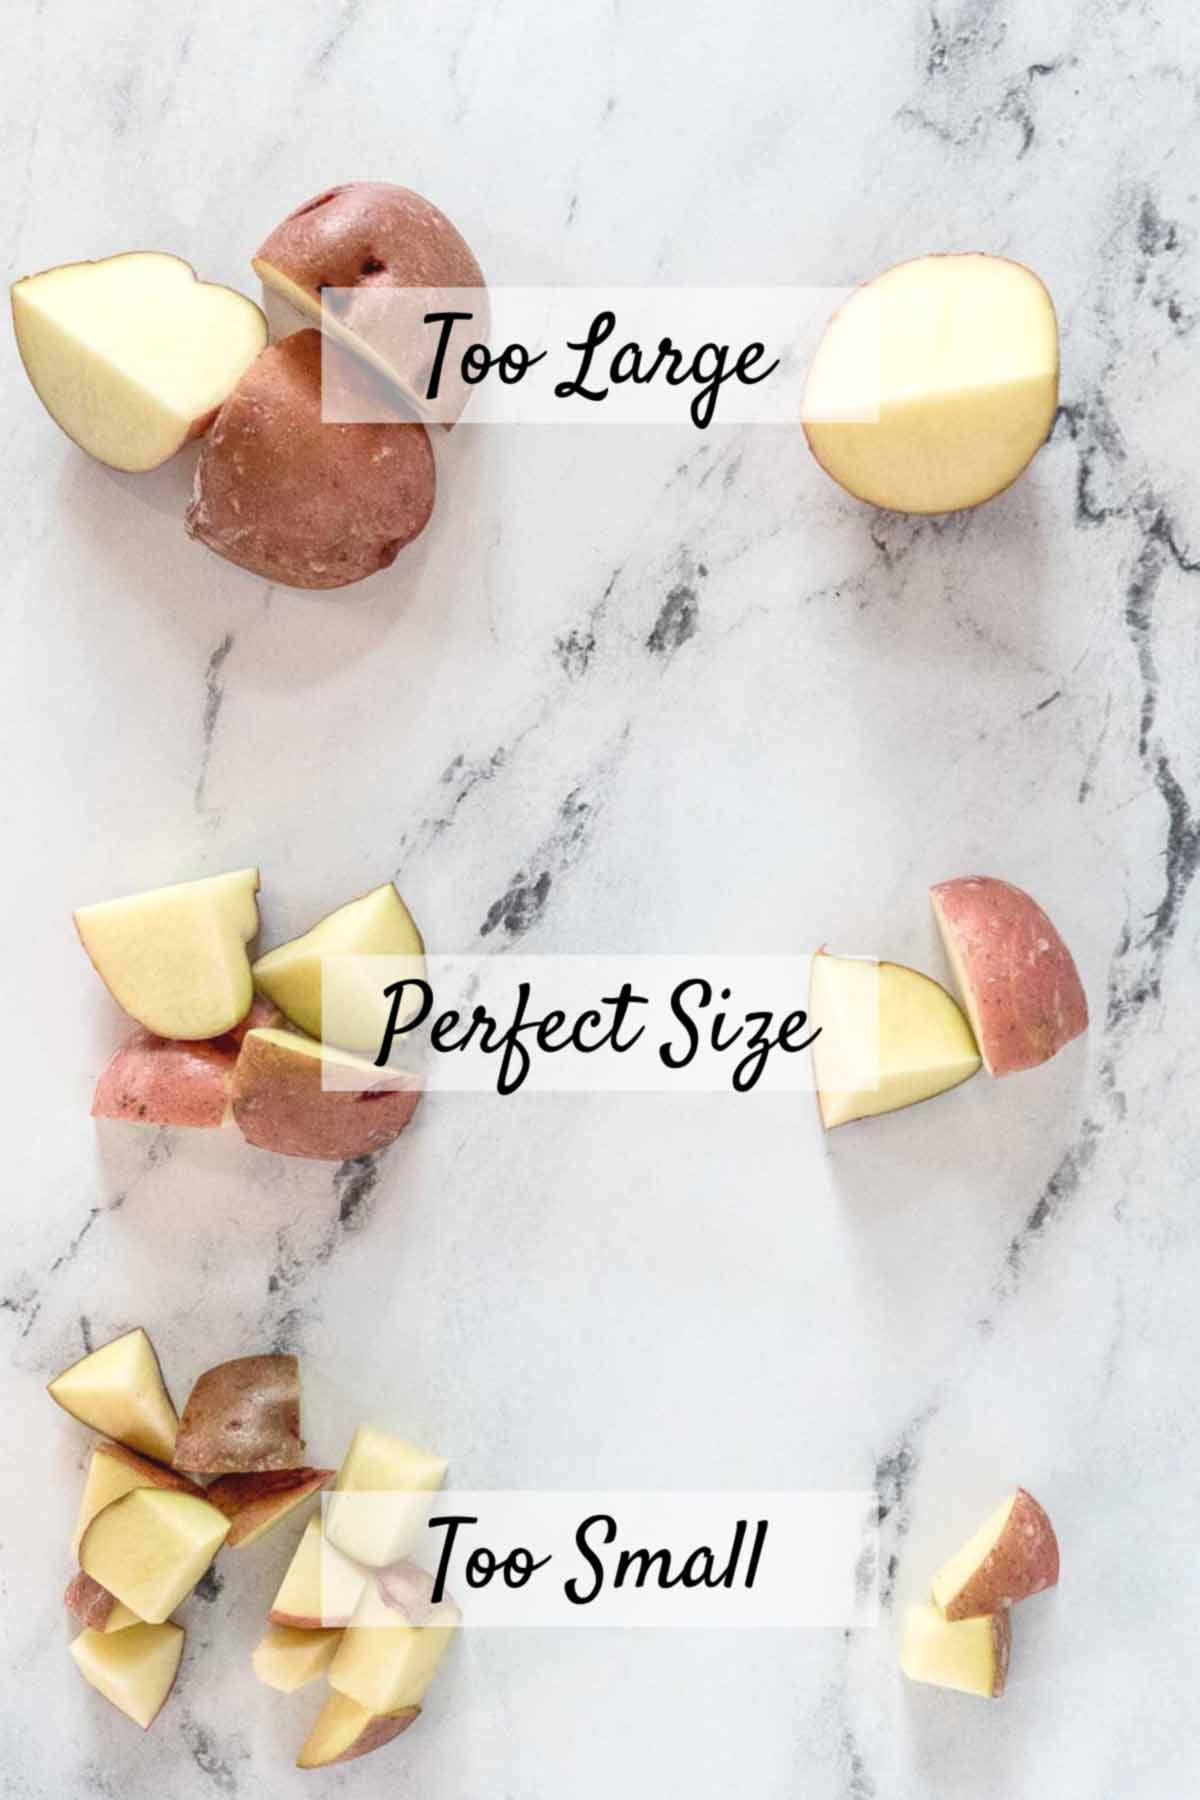 potatoes cut into three sizes, too large, too small, and just right